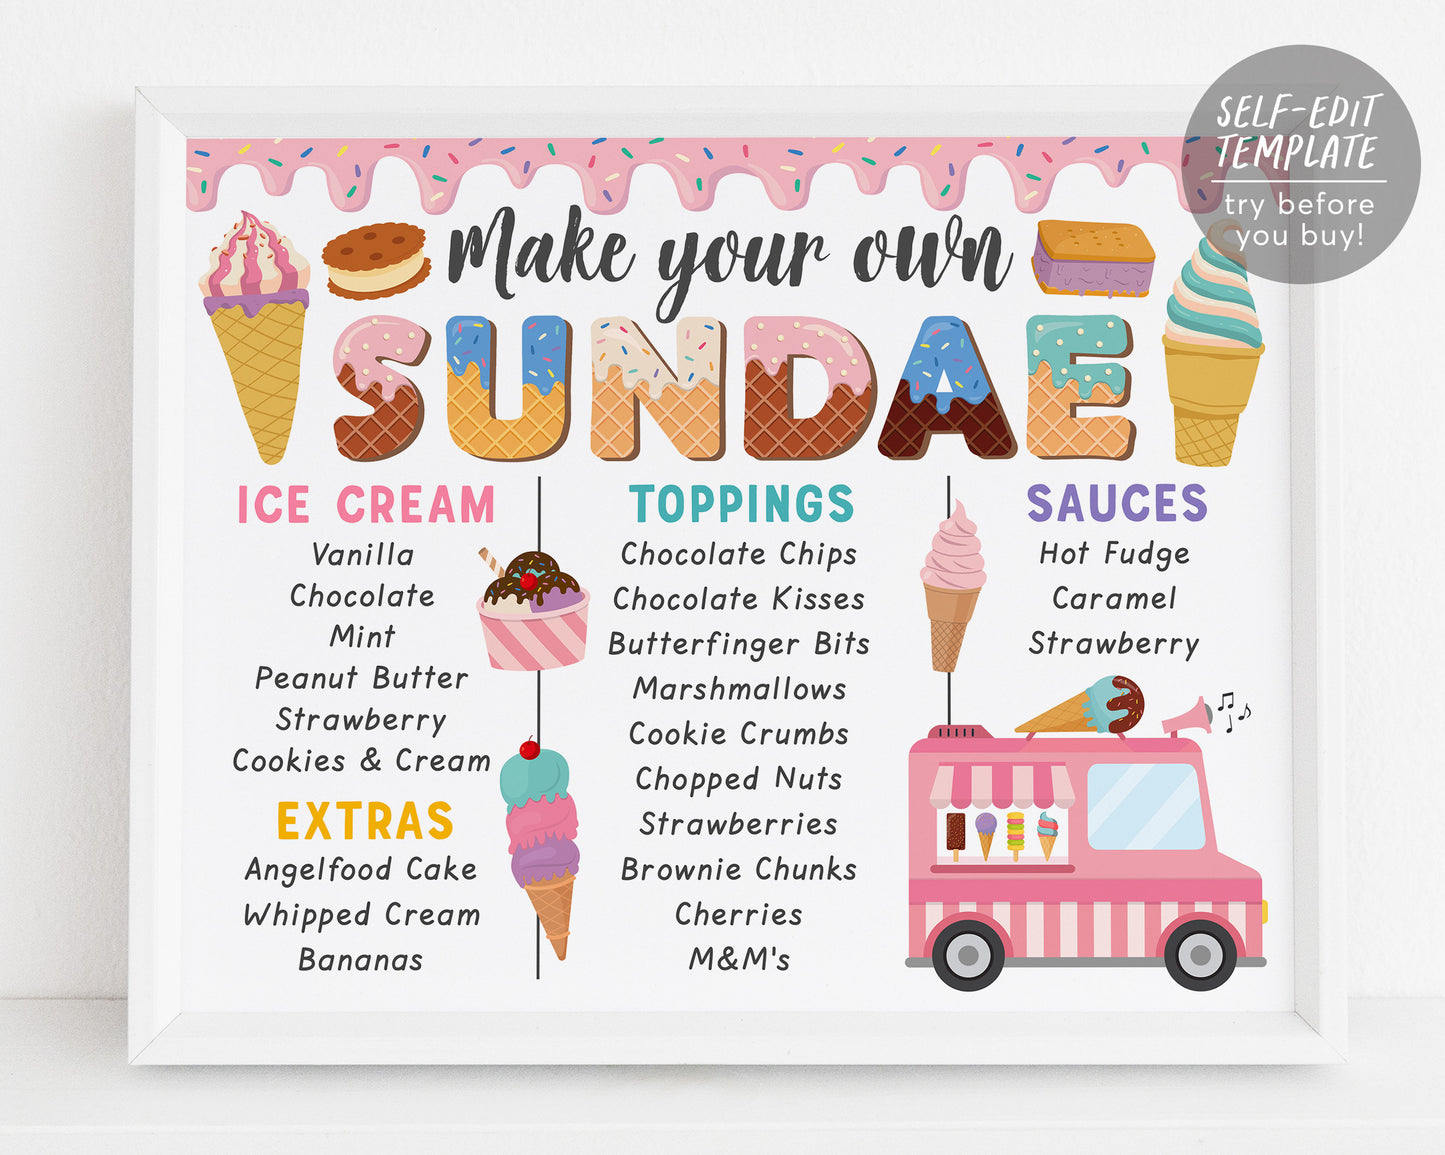 Make Your Own Sundae Menu Sign Editable Template, Ice Cream Girl Birthday Party Decorations Poster Bridal Shower Baby Shower Decor Printable